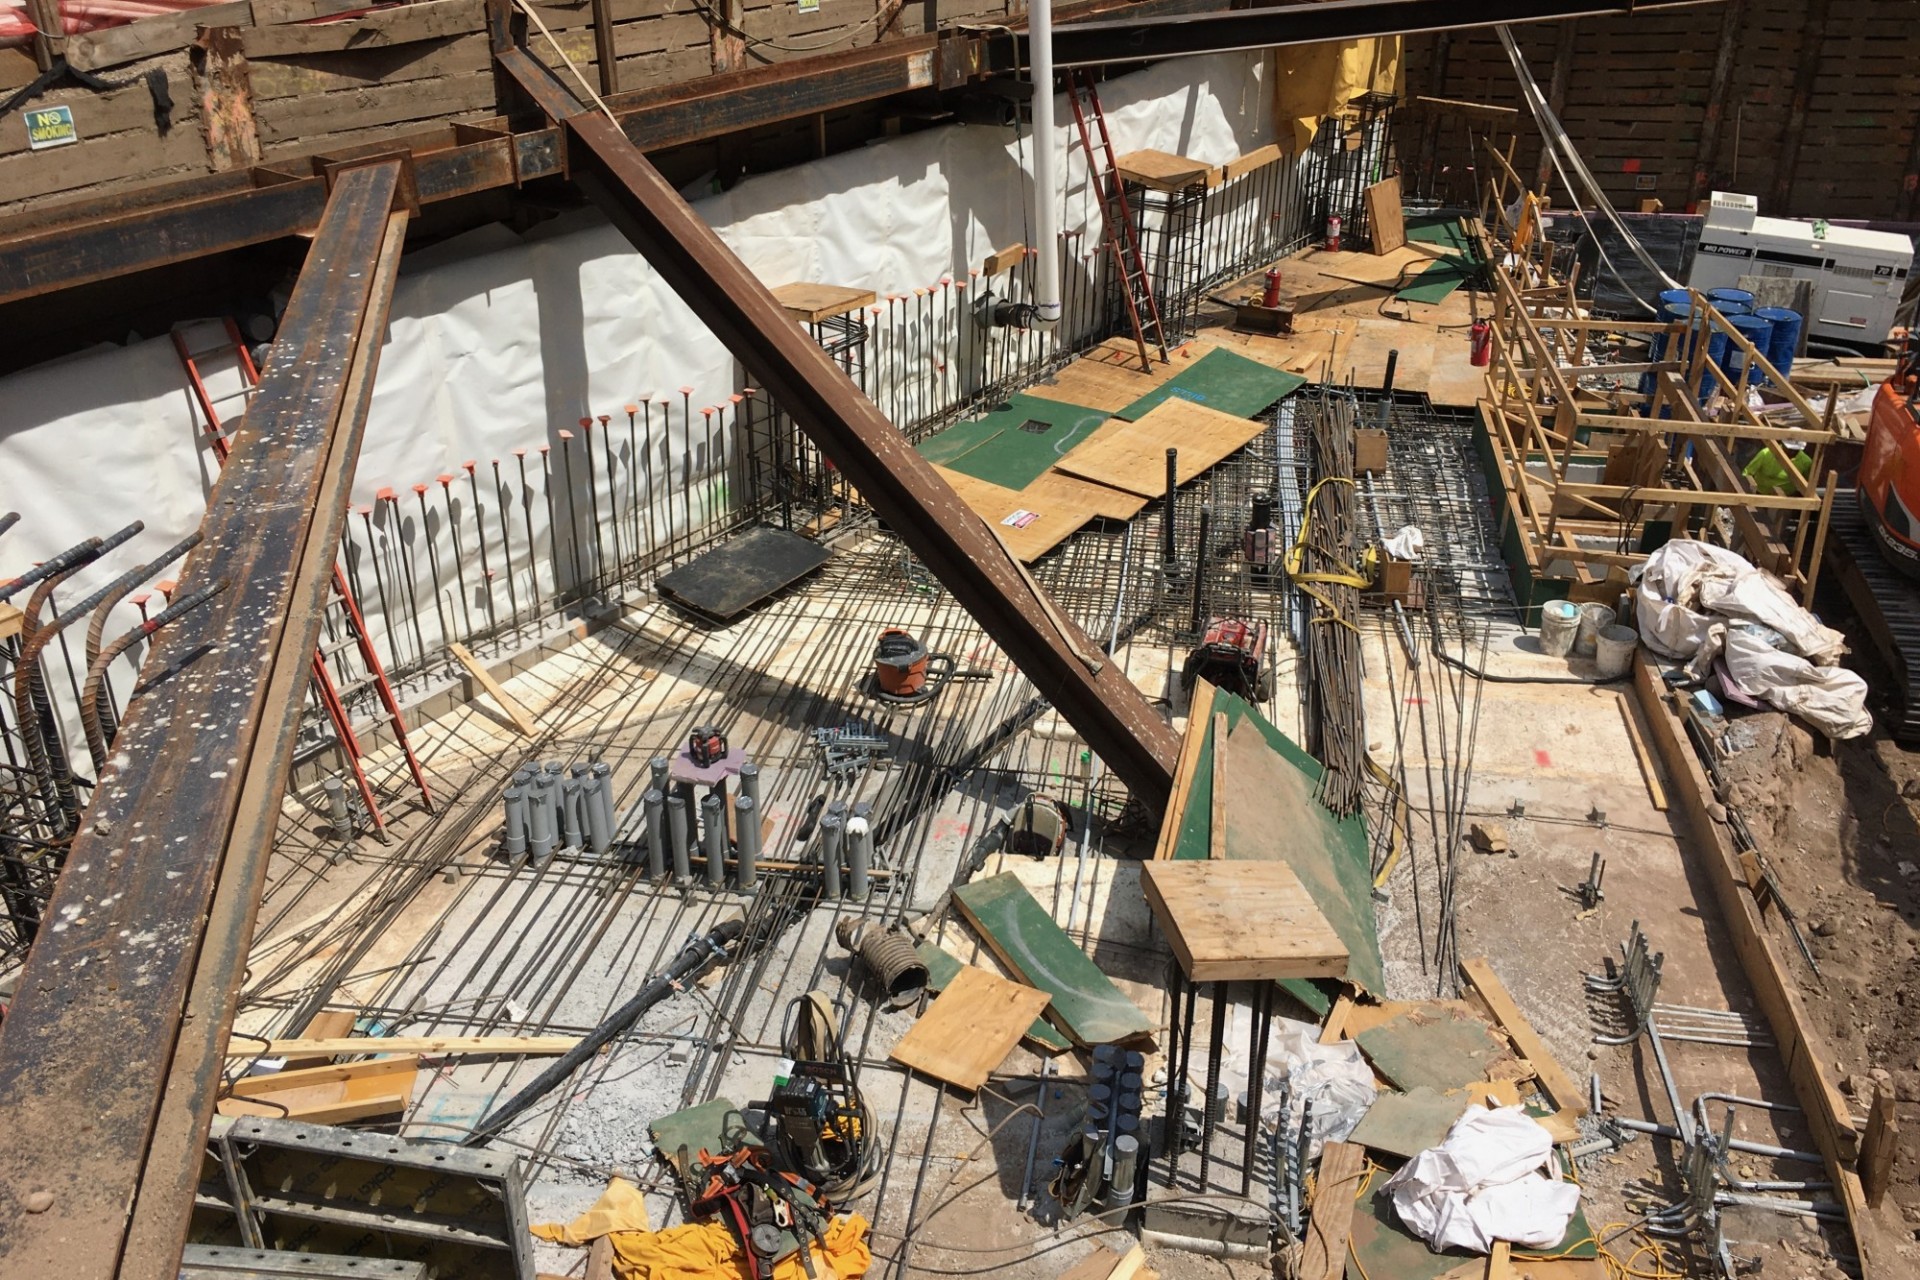 A view of the 600 W. 125th Street construction site with rebars along the perimeter of the northern portion of the site with steel beams overhead.